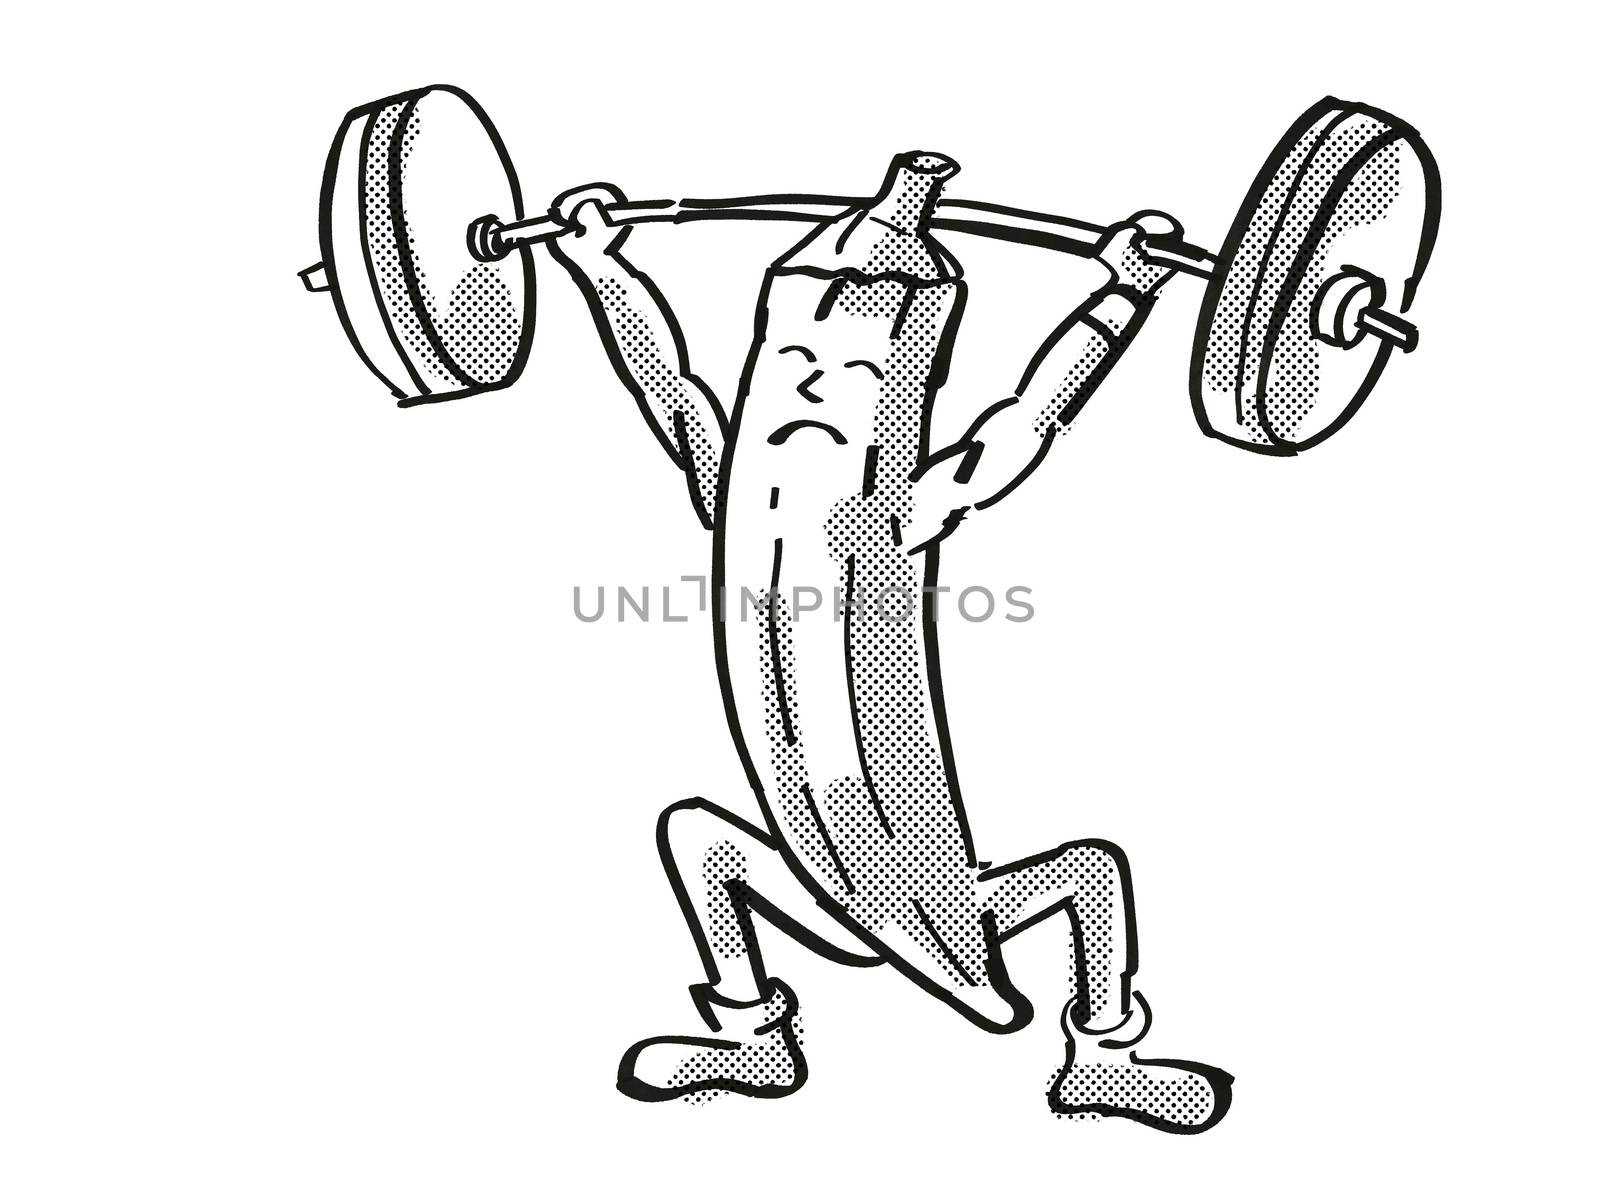 Retro cartoon style drawing of an Okra, ladies fingers or ochro, a healthy vegetable lifting a barbell on isolated white background done in black and white